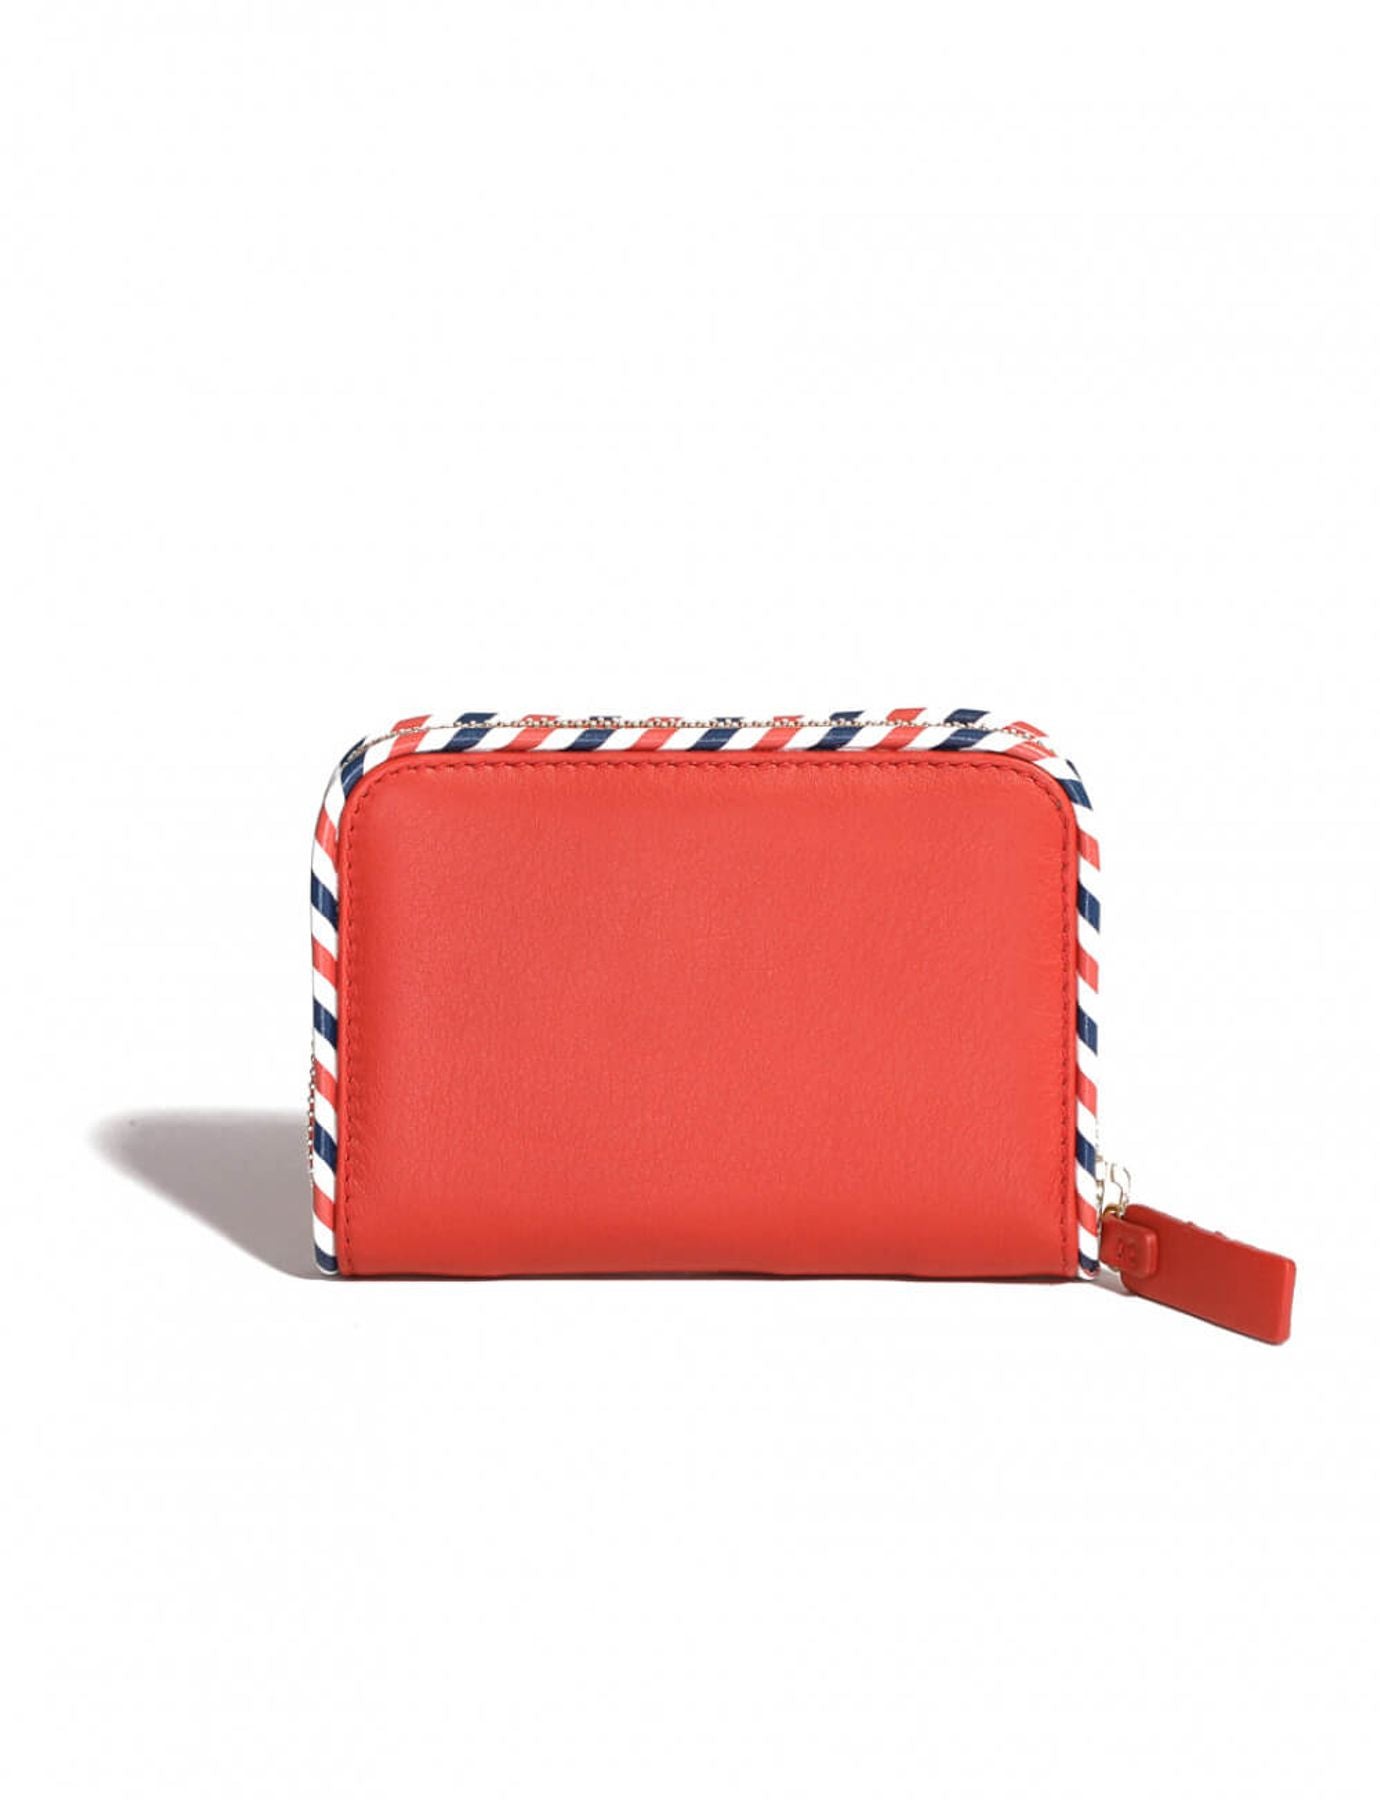 wallet-marcia-red